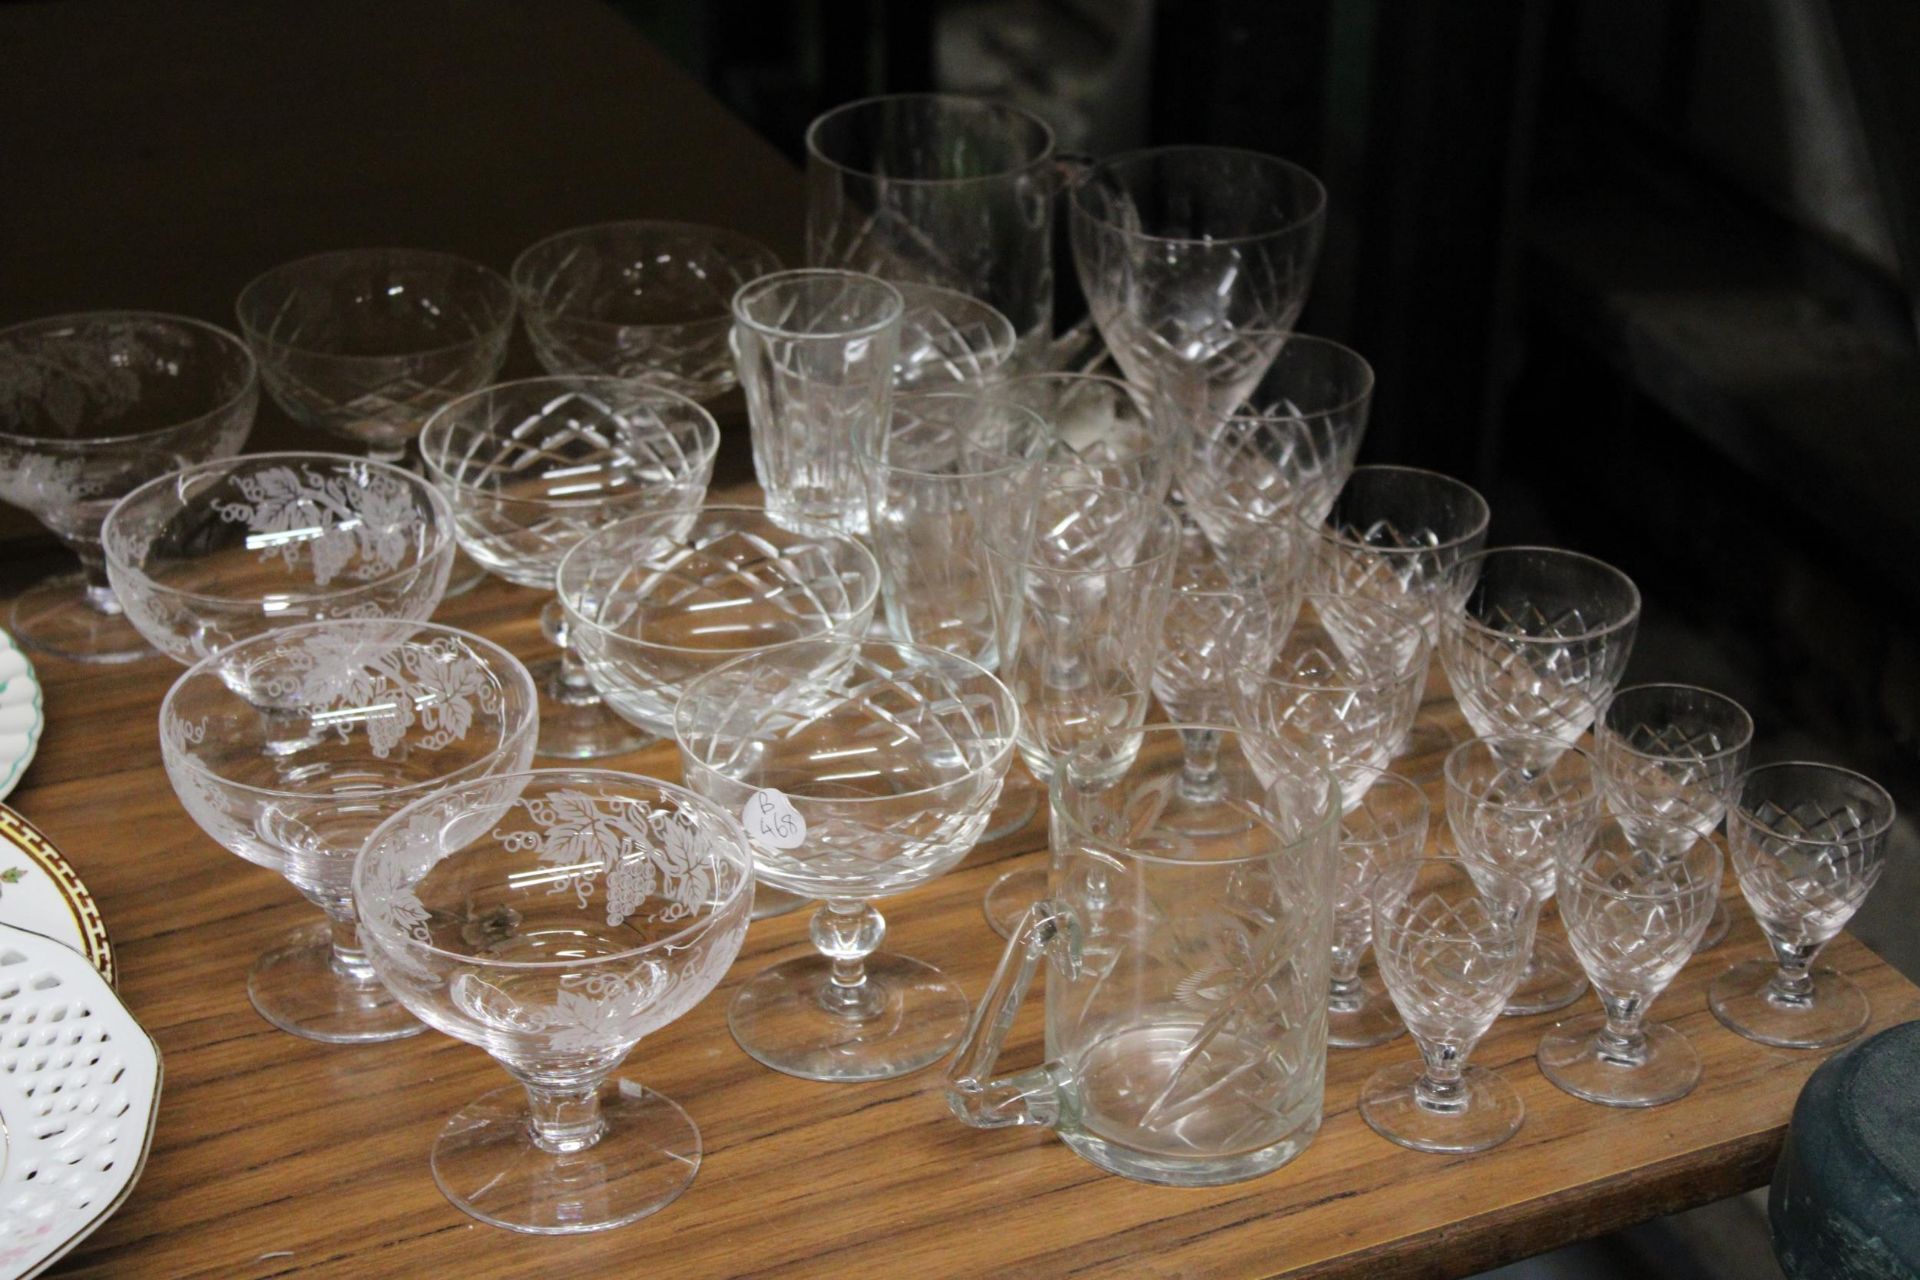 A QUANTITY OF GLASSES TO INCLUDE WINE, SHERRY, DESSERT DISHES, ETC